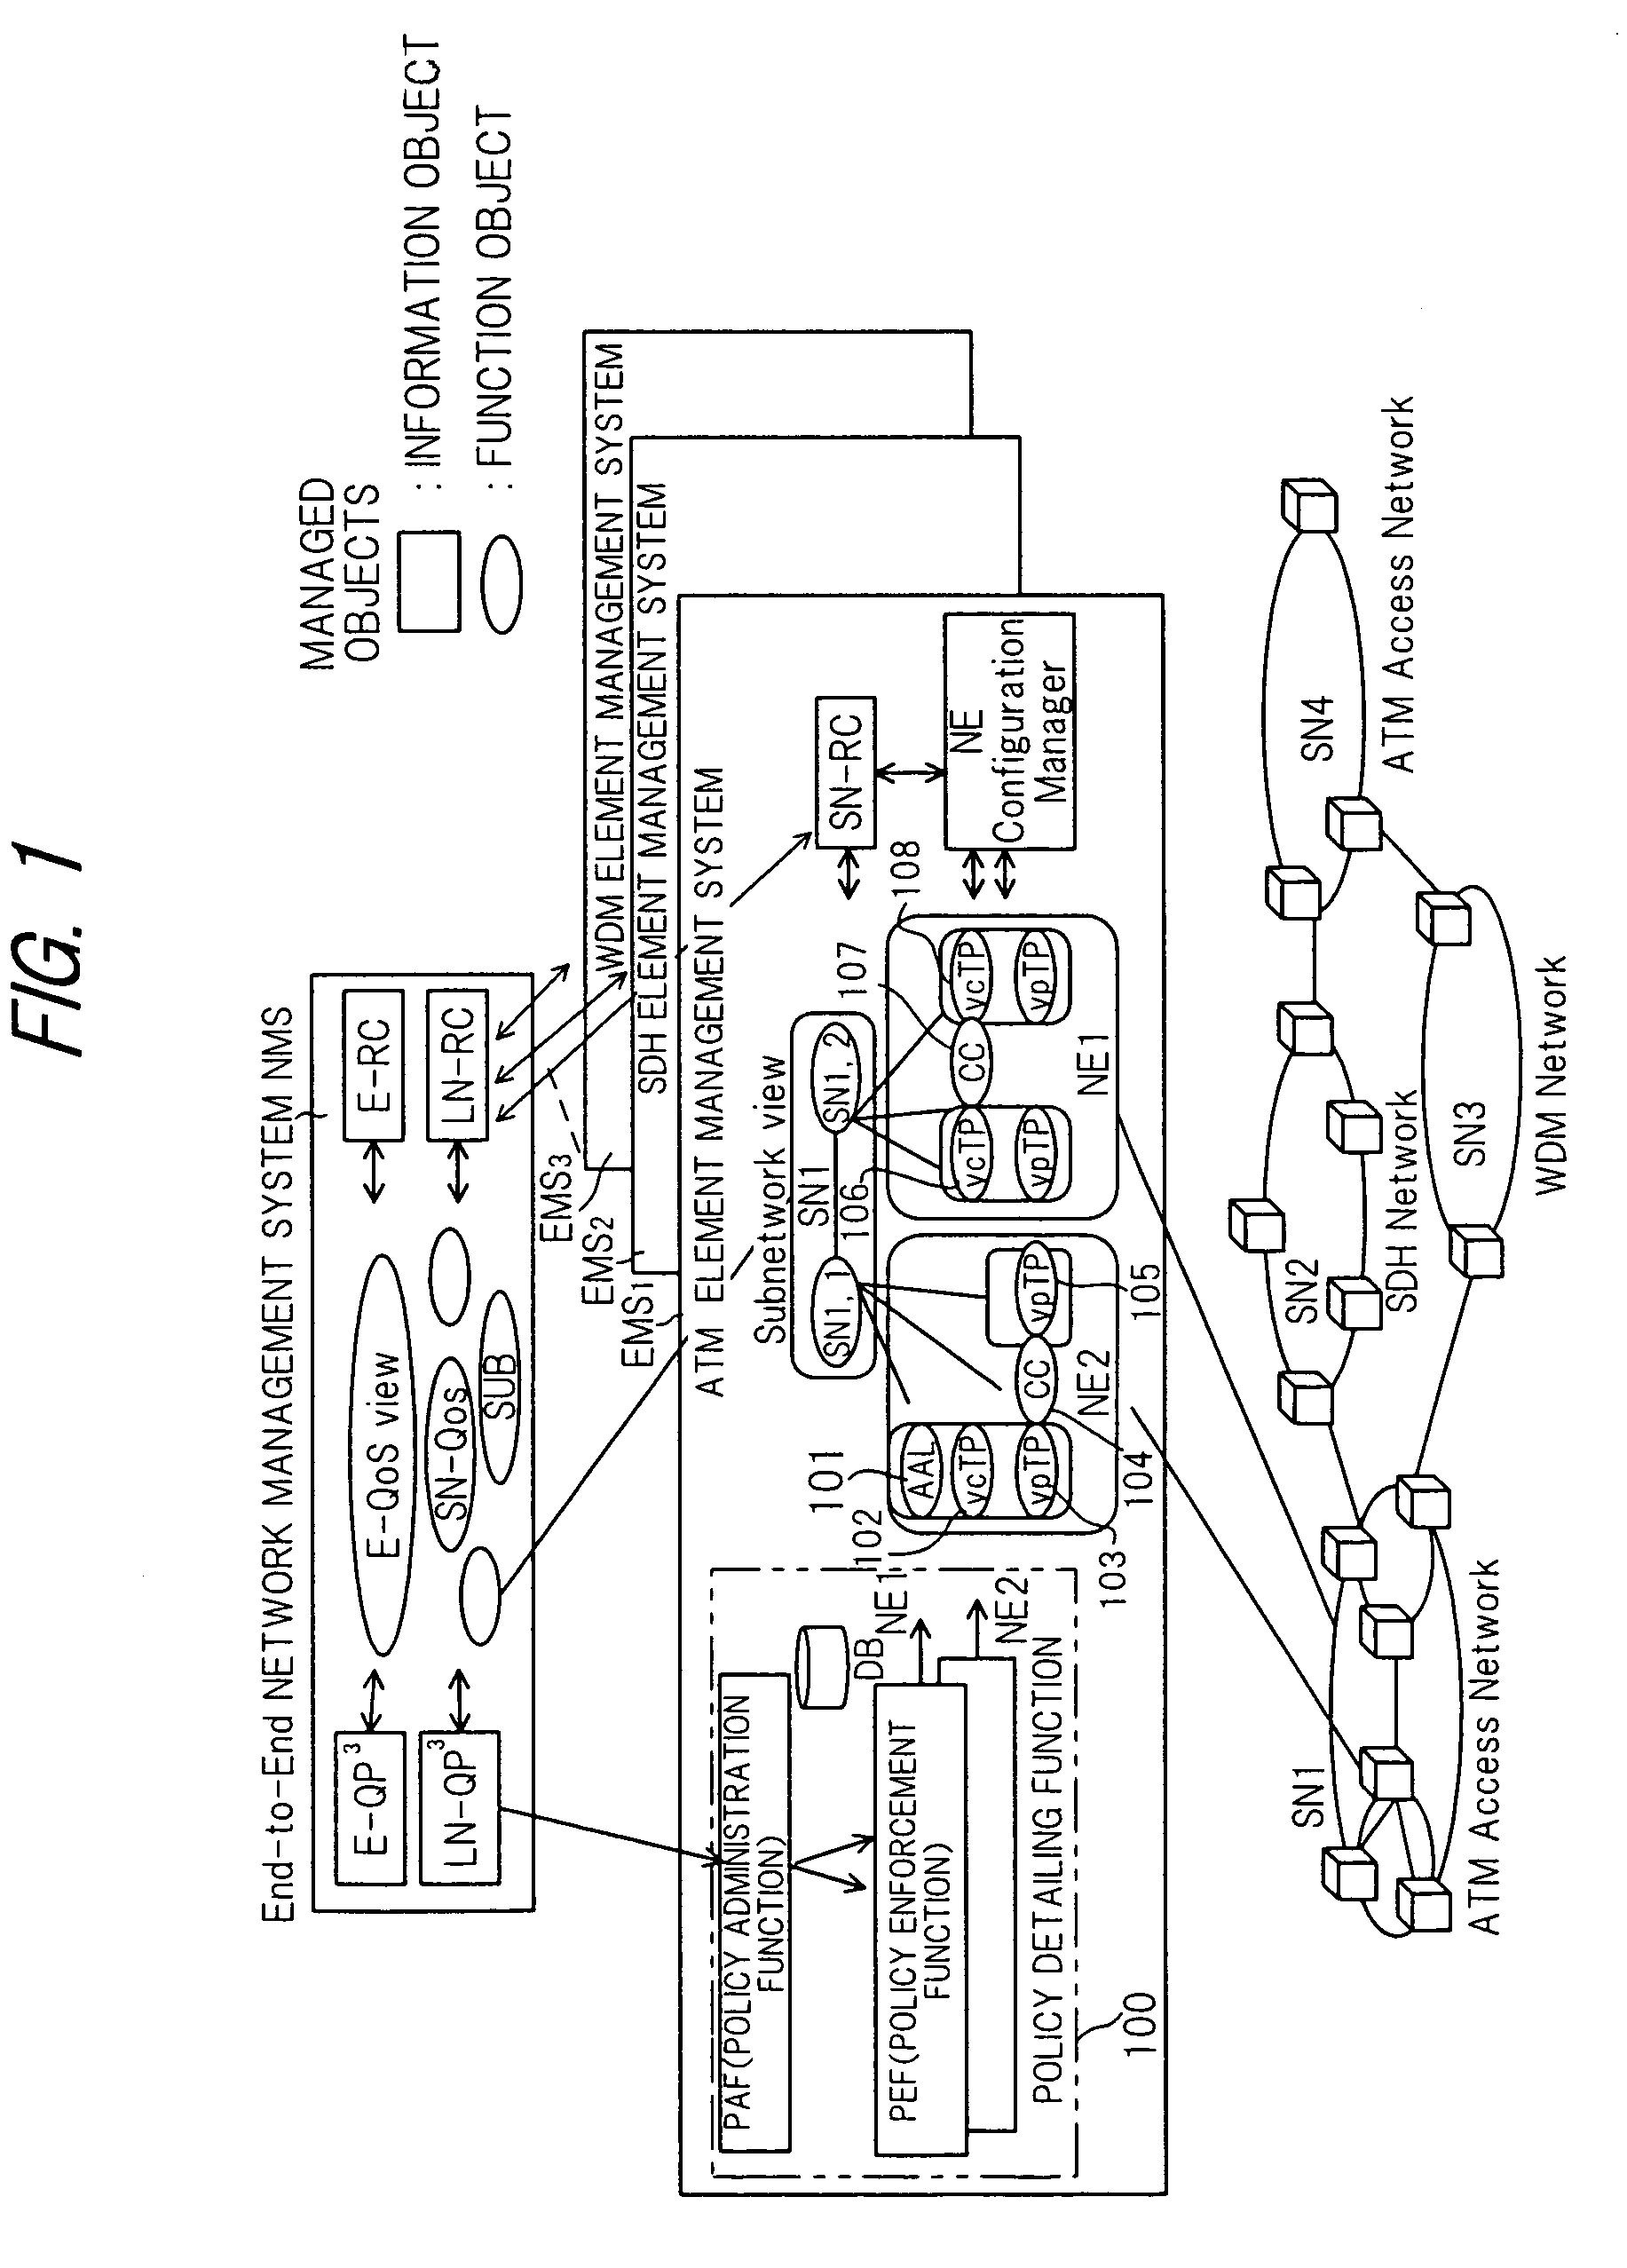 Communication network management system for automatically converting action parameters to network technology dependent parameters using a selected conversion rule conforming to a network technology